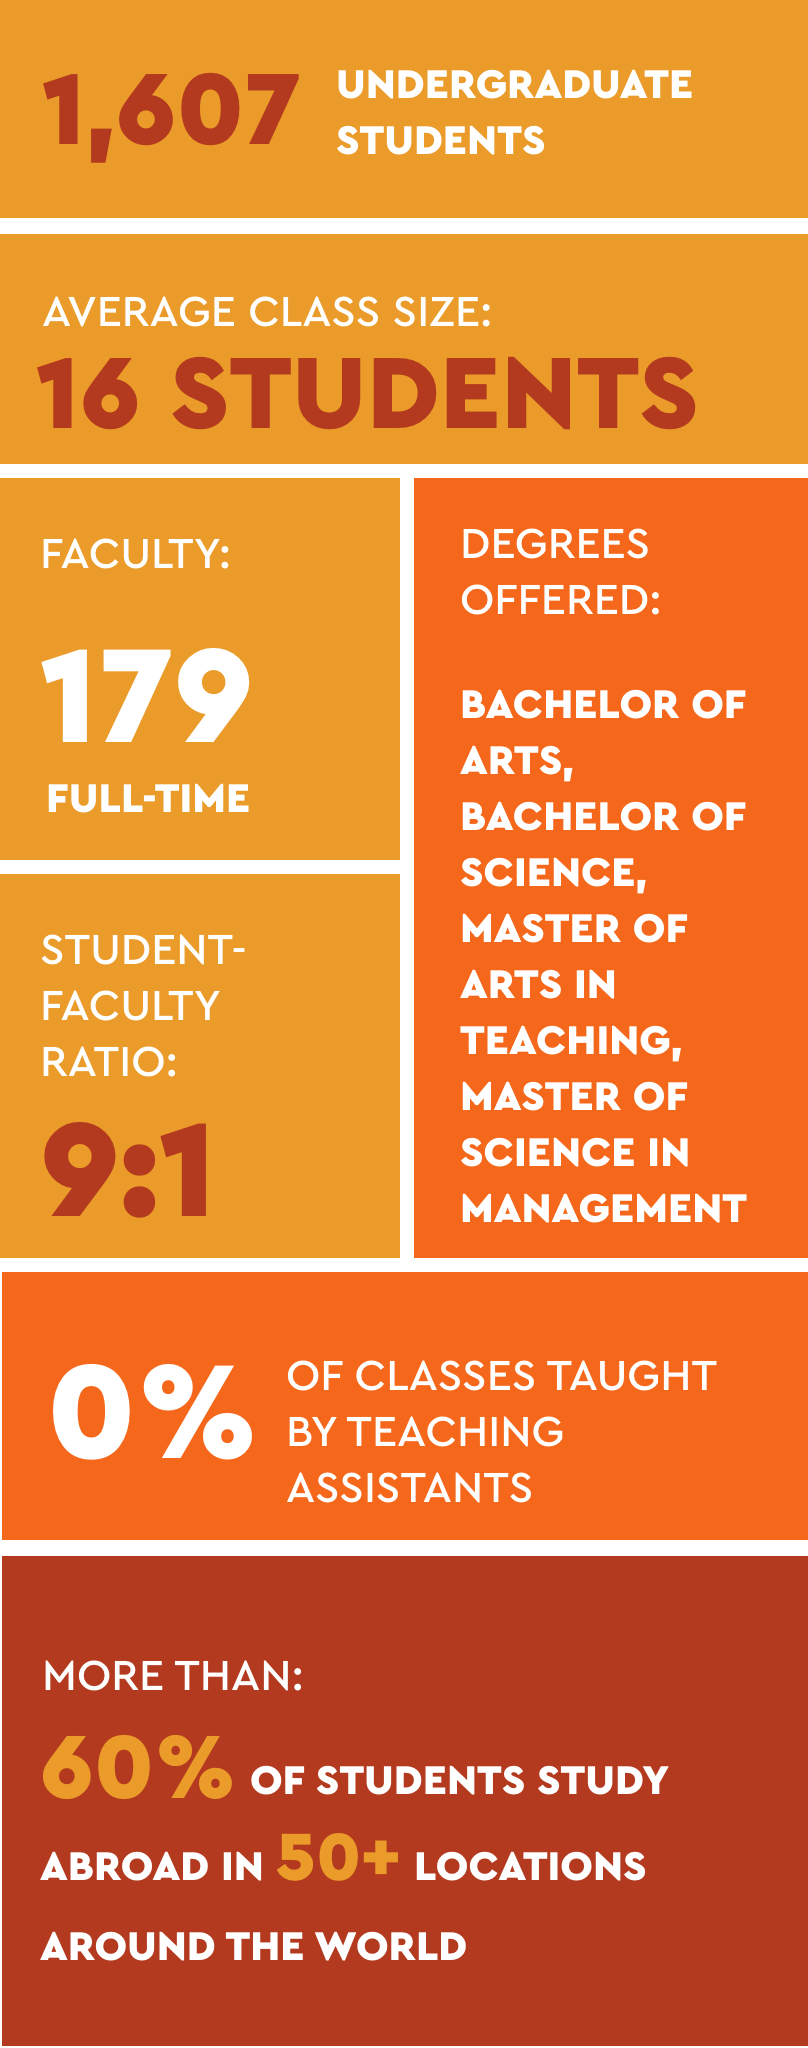 1,607 undergraduate students; Average class size is 16 students; 179 full-time faculty; Student-faculty ratio is 9:1; Degrees offered: Bachelor of Arts, Bachelor of Science, Master of Arts in Teaching, Master of Science in Management; 0% of classes taught by teaching assistants; More than 60% of students study abroad in 50+ locations around the world